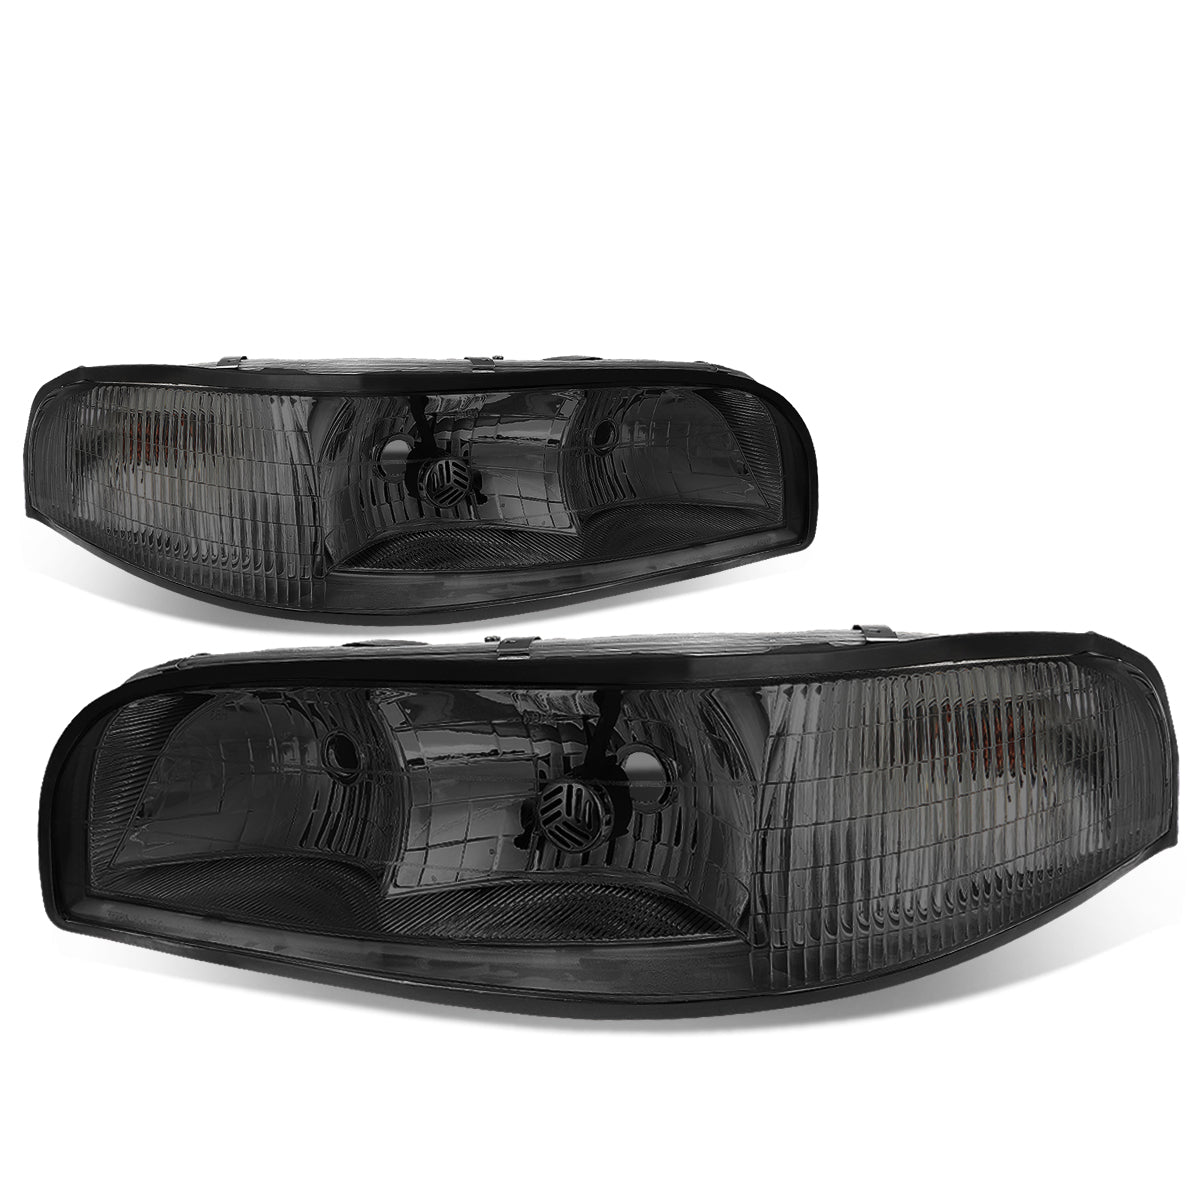 Factory Style Headlights<br>97-99 Buick LeSabre